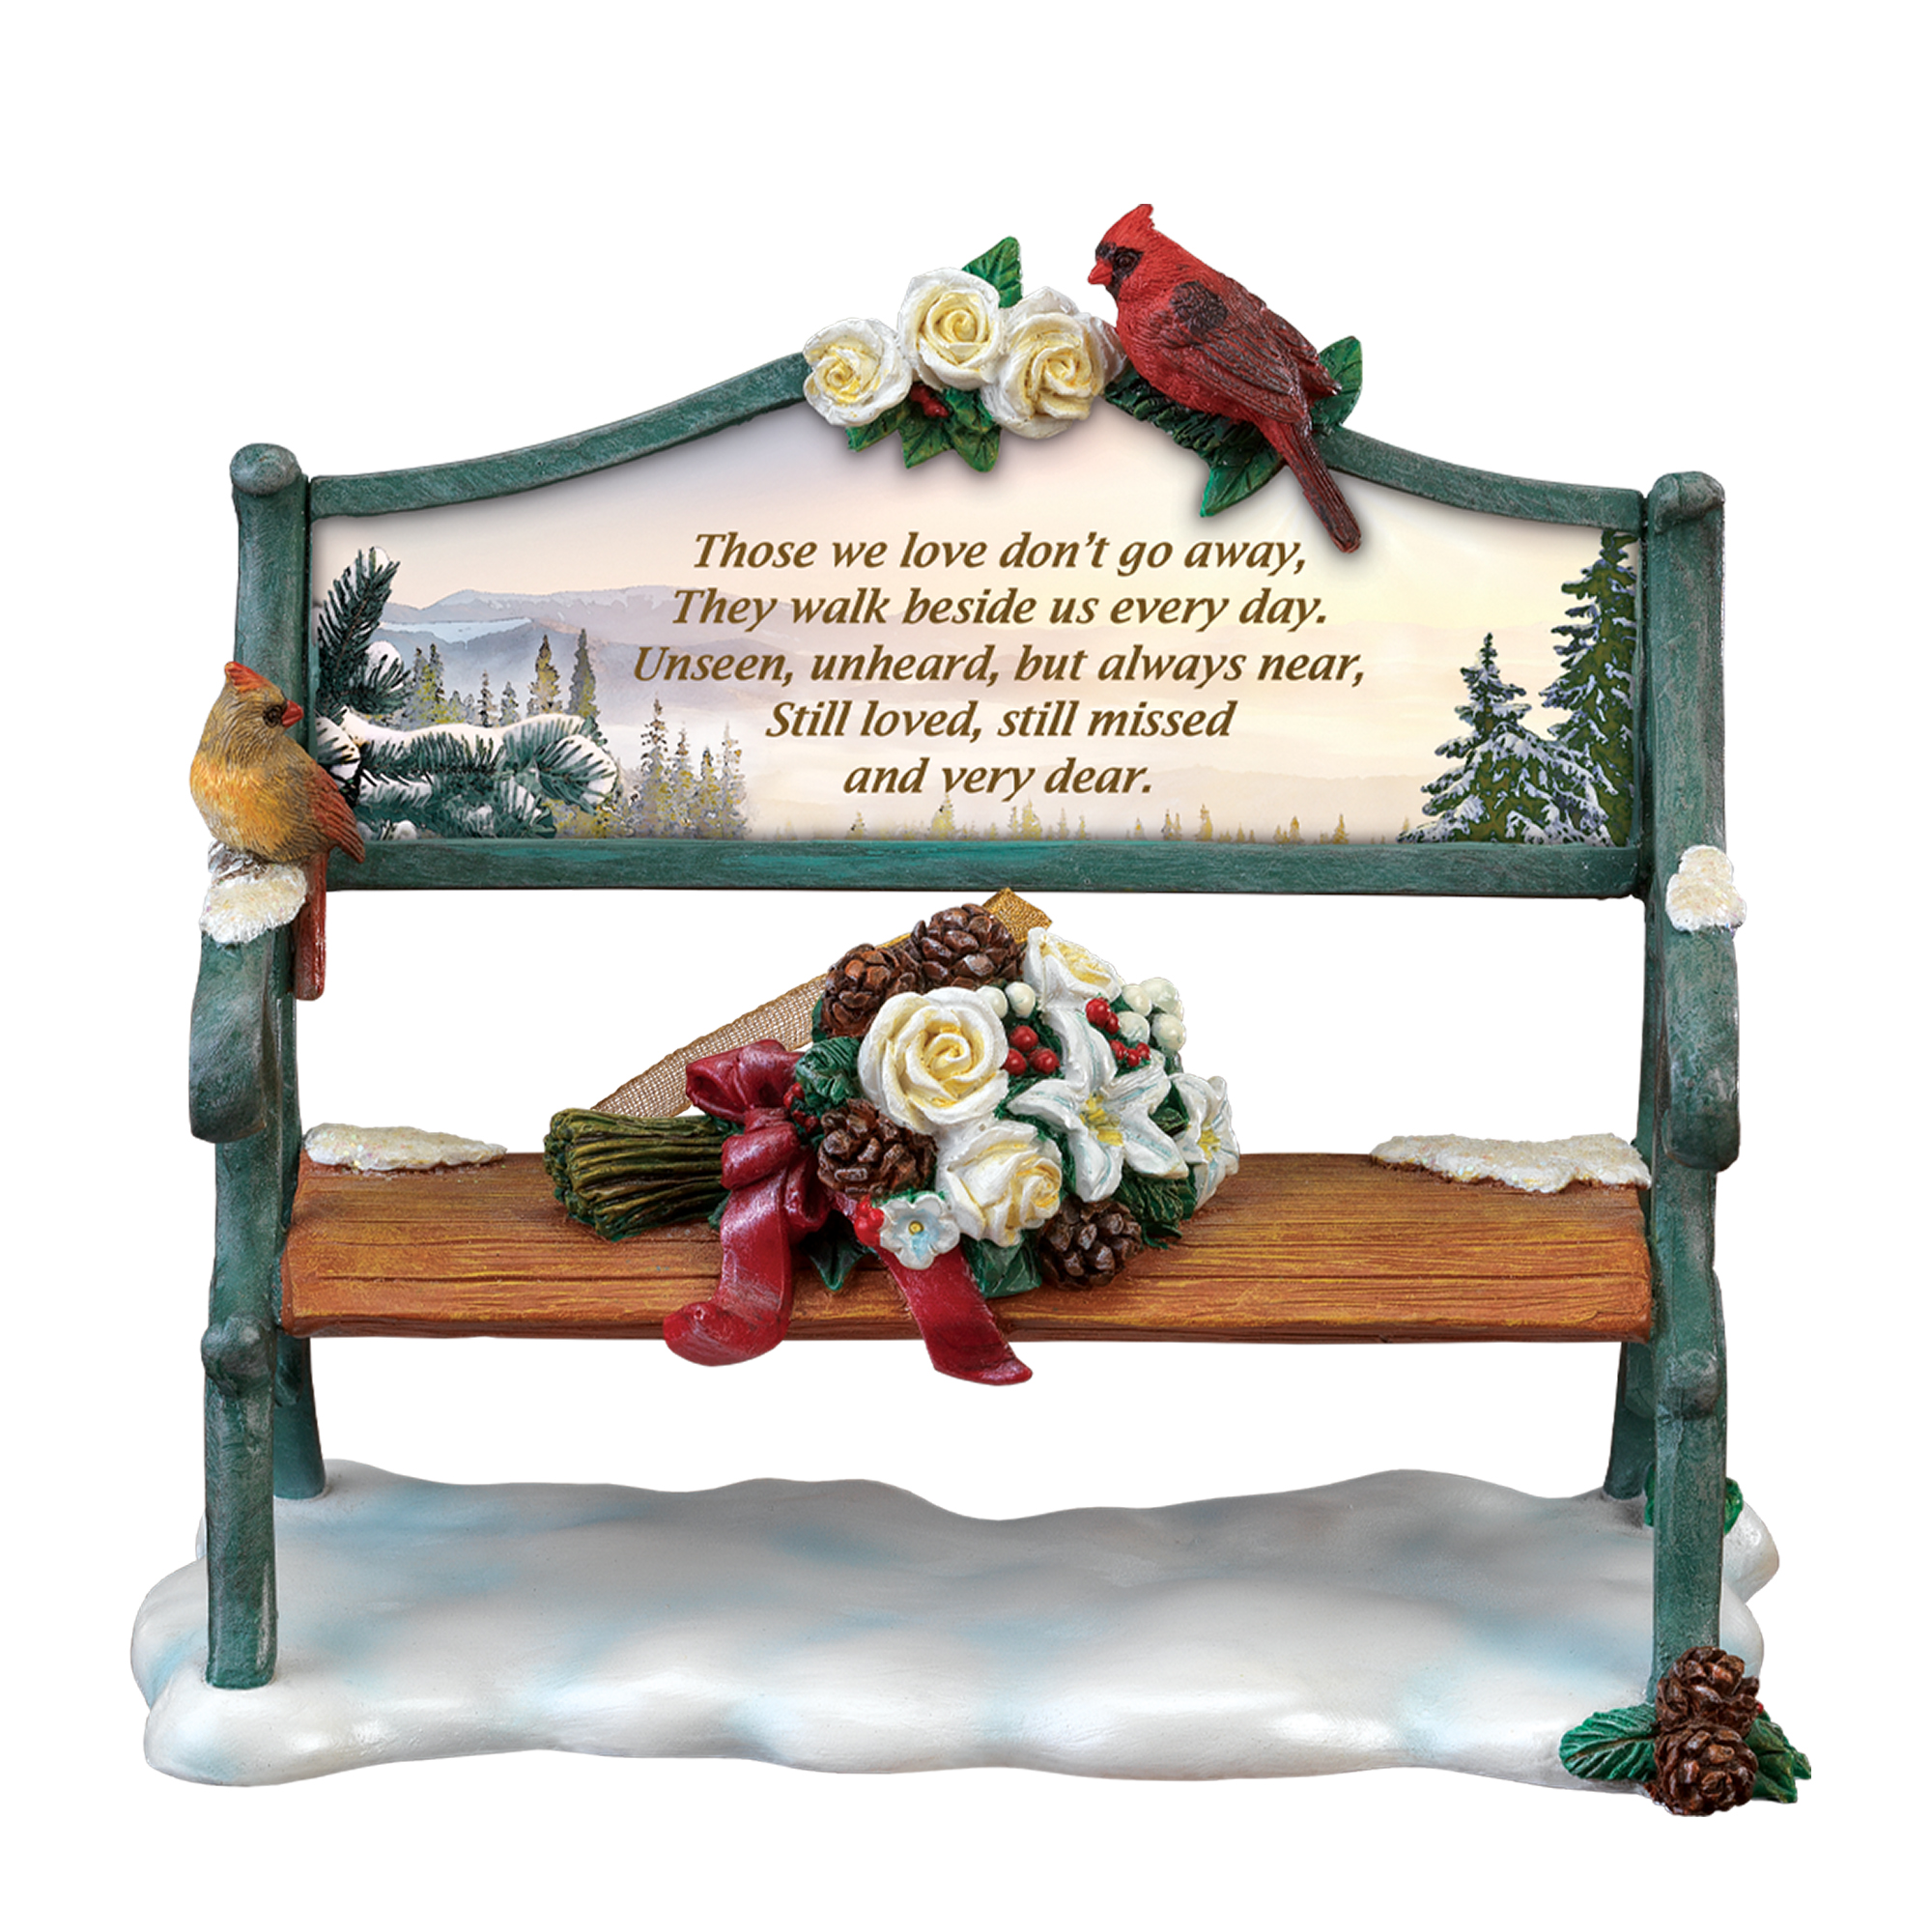 Always in My Heart Remembrance Bench Ornament 10605 0016 d hanging